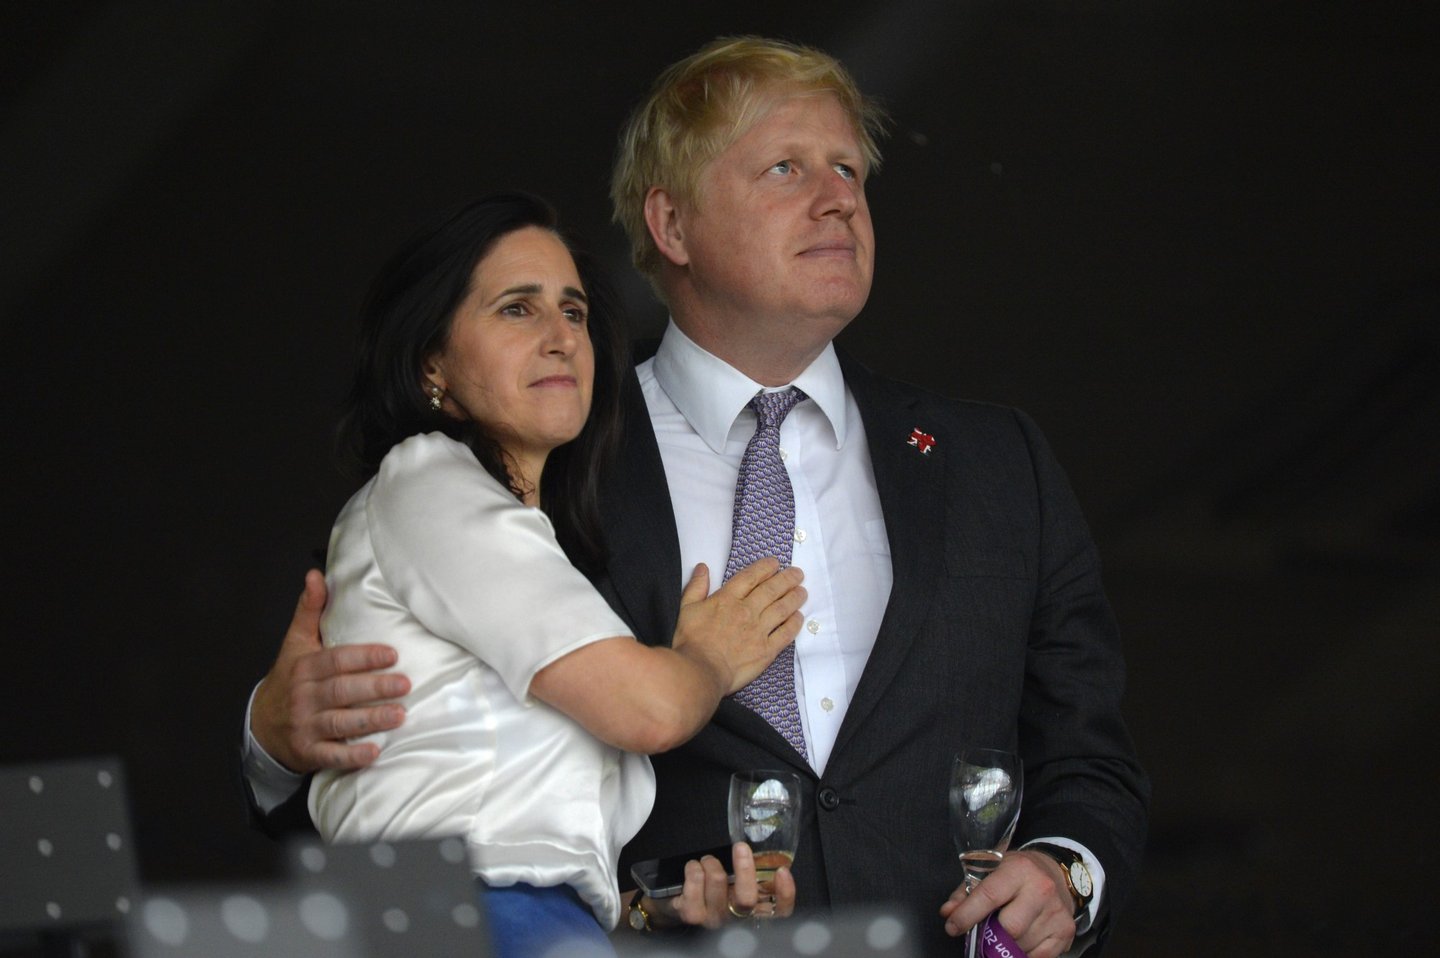 London's Mayor Boris Johnson (R) waits with his wife Marina Wheeler (L) prior to the start of the opening ceremony of the London 2012 Olympic Games on July 27, 2012 at the Olympic Stadium in London. AFP PHOTO / ODD ANDERSEN (Photo credit should read /AFP/GettyImages)